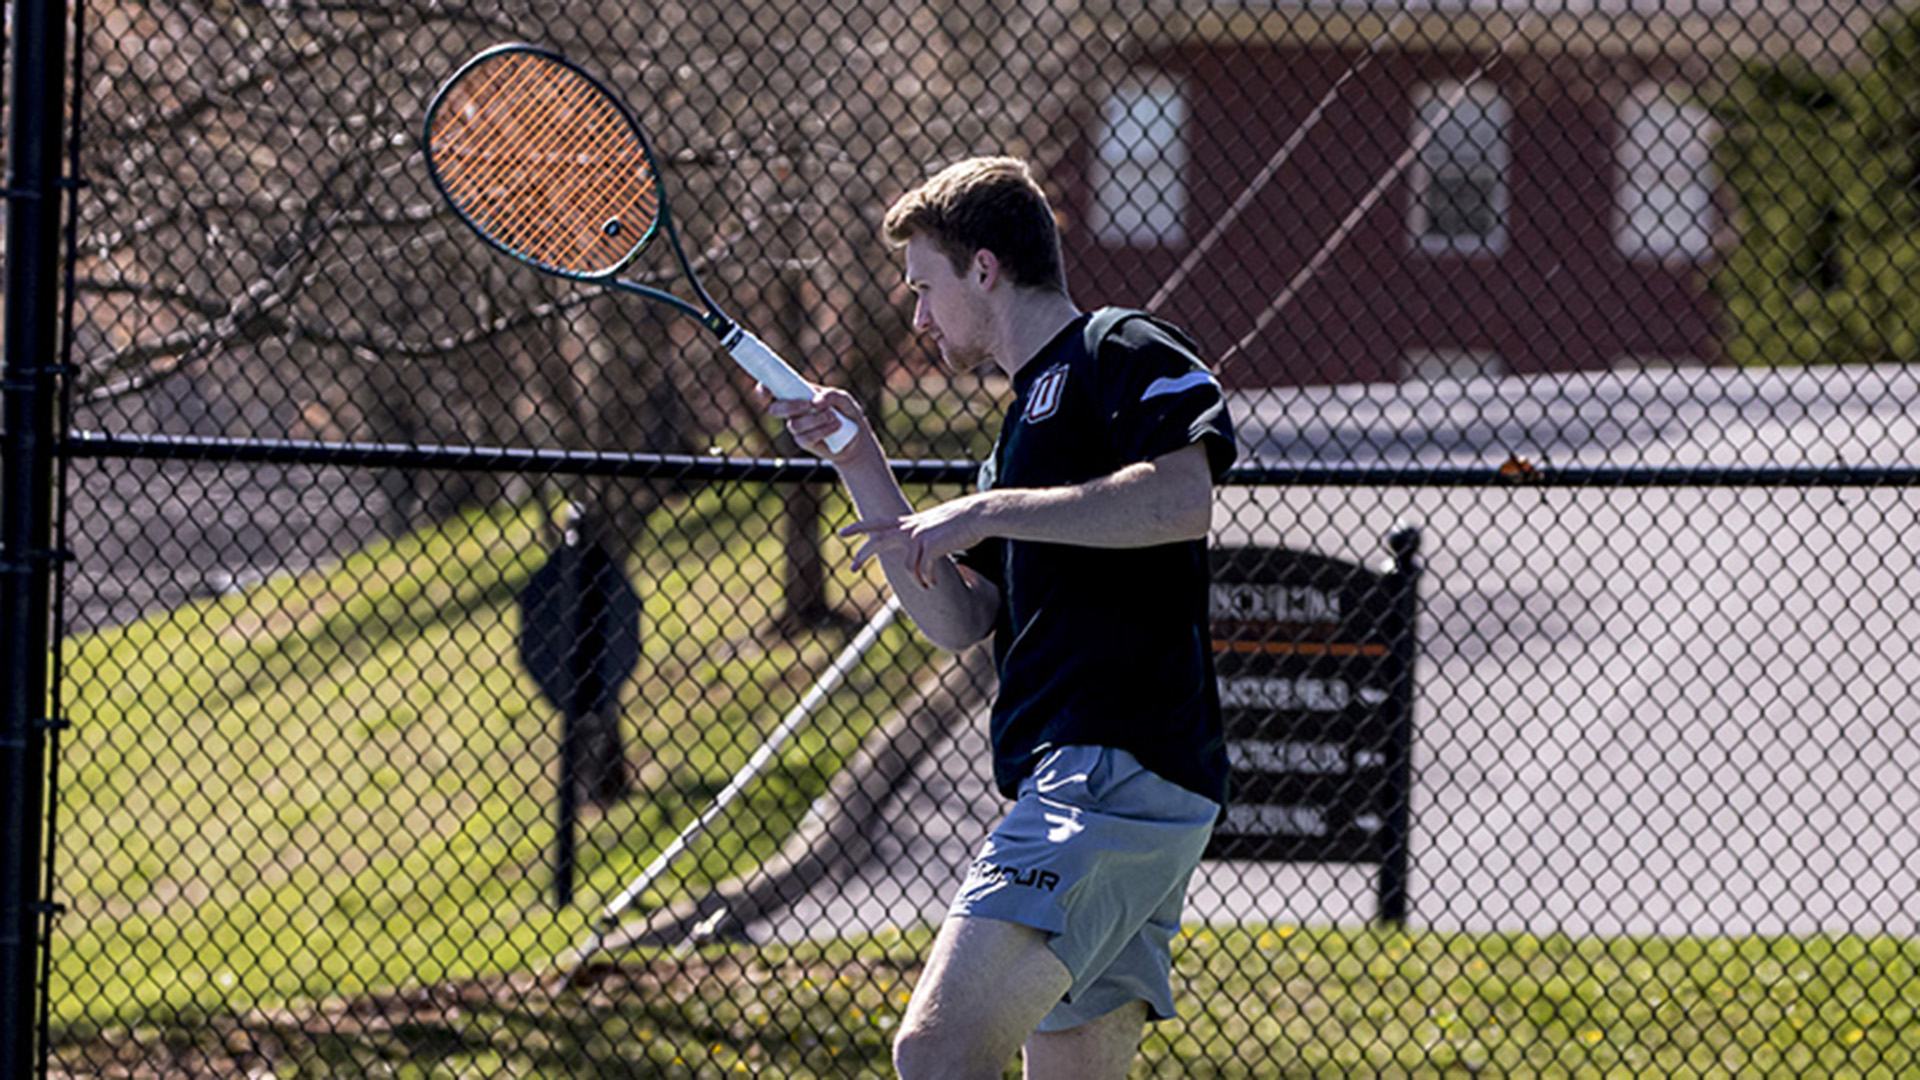 Marco Meon earned an 8-0 win in singles for the Pioneers (photo by Chuck Williams)